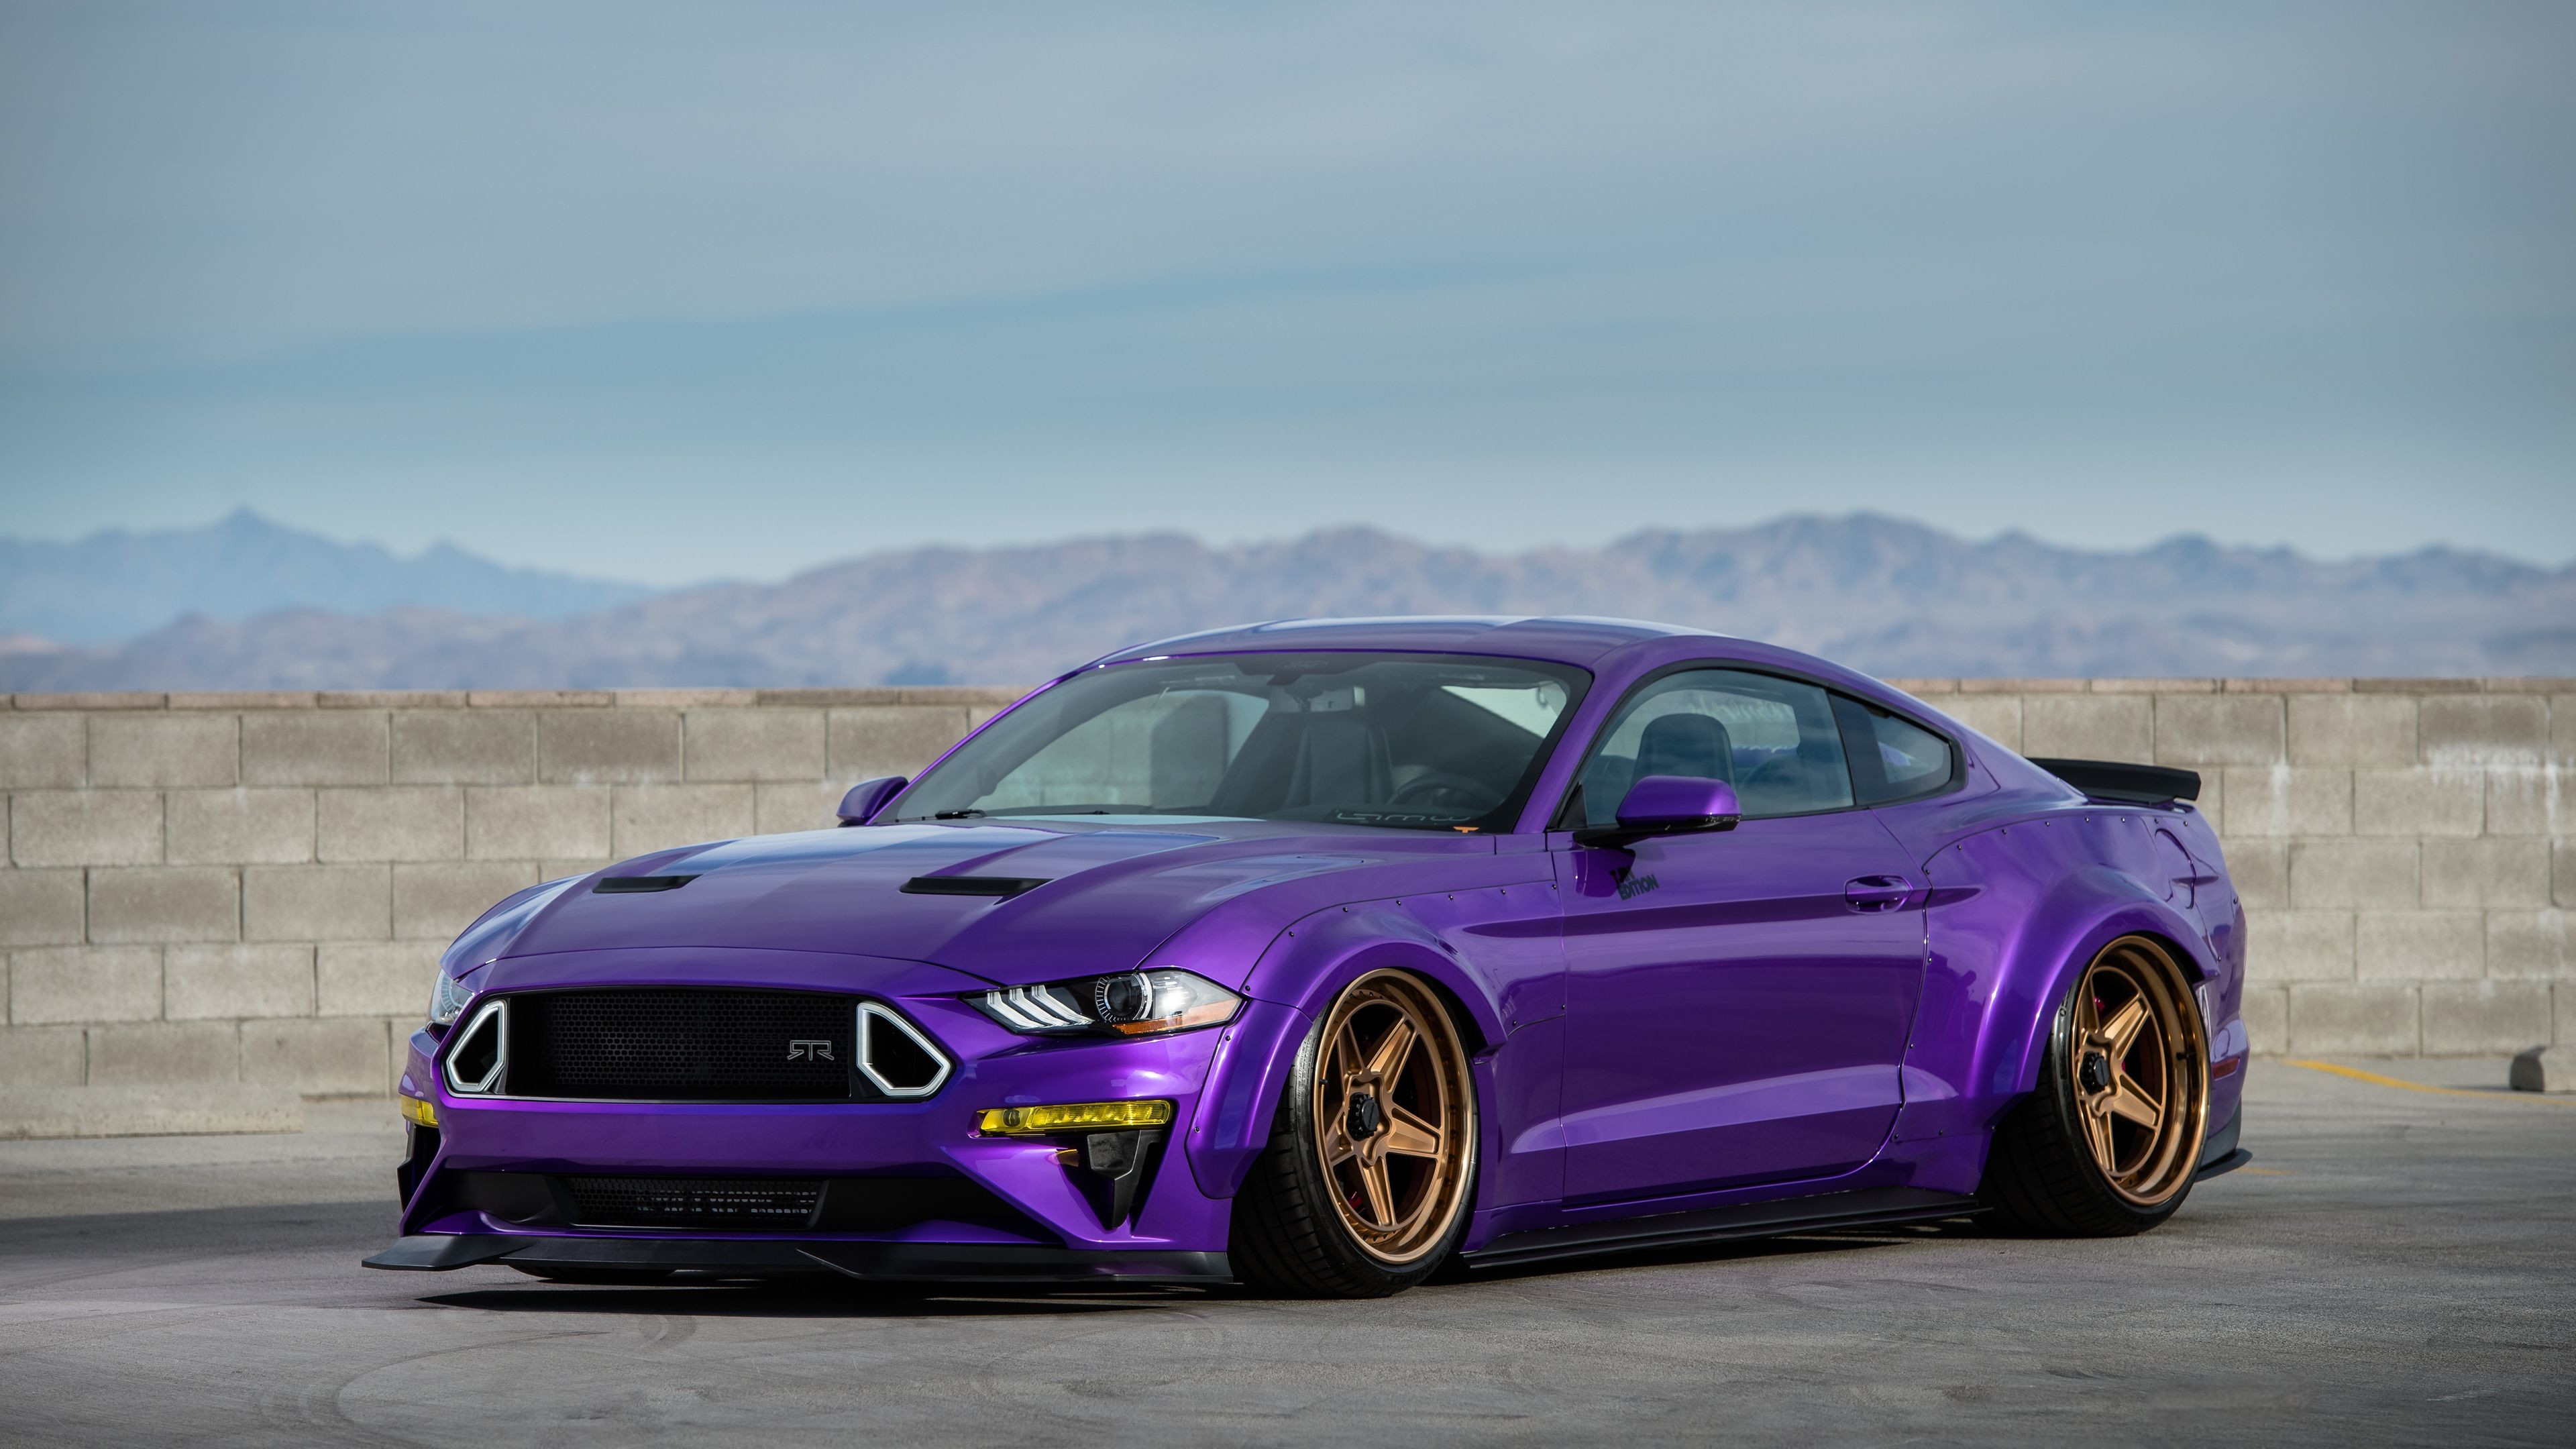 Tjin Edition Ford Mustang Ecoboost 4k Wallpaper Mustang Car Pc Wallpaper 4k 3840x2160 Wallpaper Teahub Io